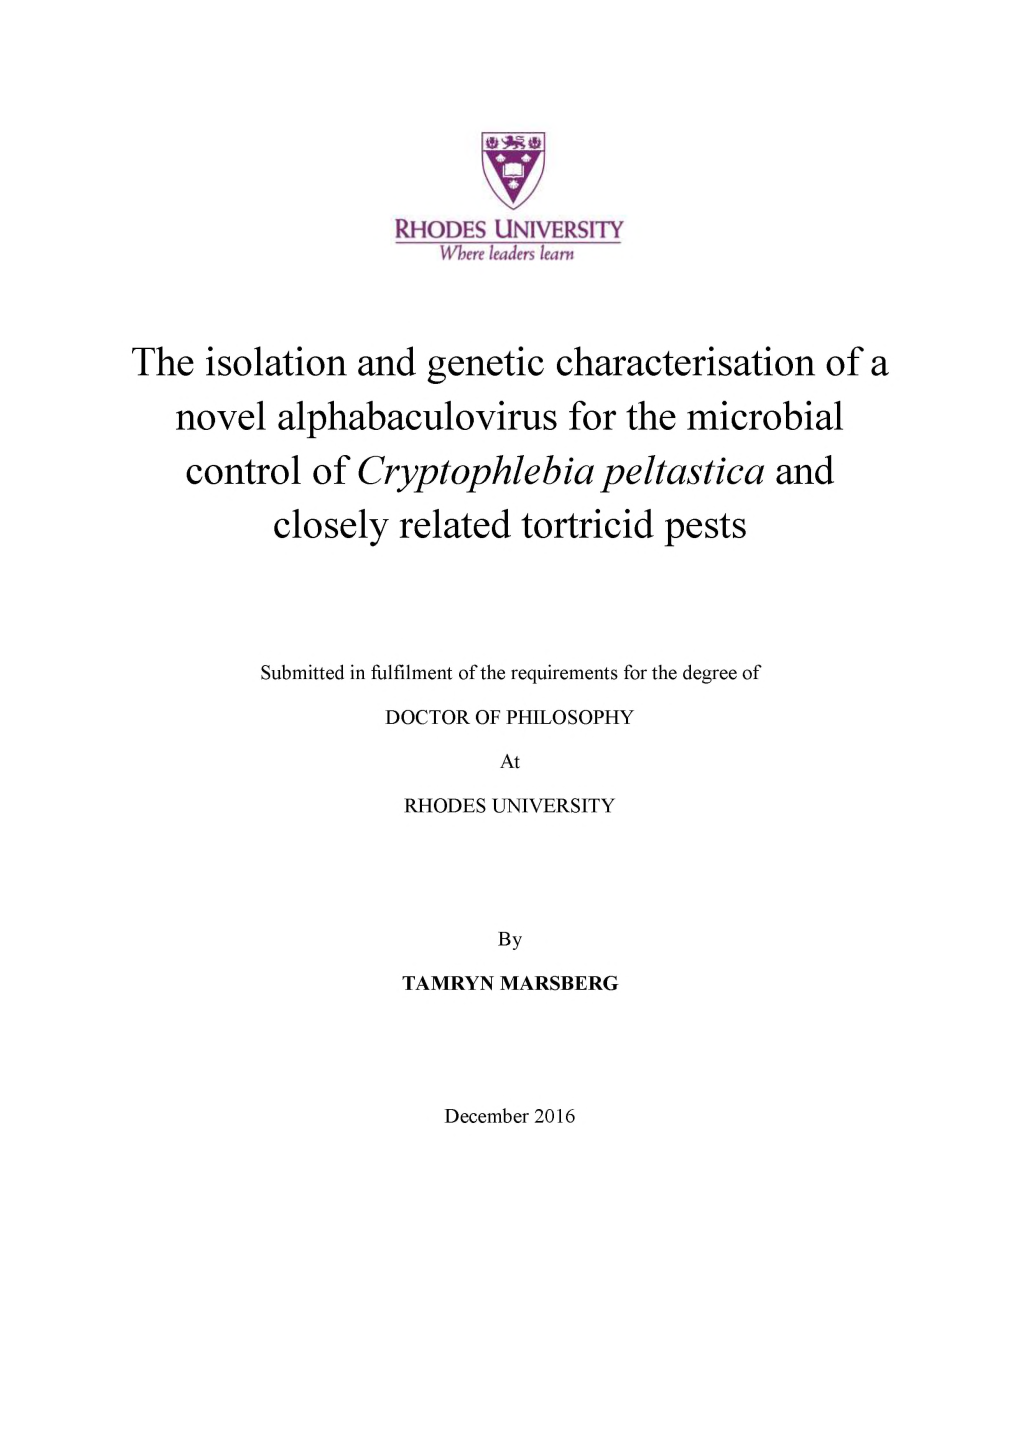 The Isolation and Genetic Characterisation of a Novel Alphabaculovirus for the Microbial Control of Cryptophlebia Peltastica and Closely Related Tortricid Pests